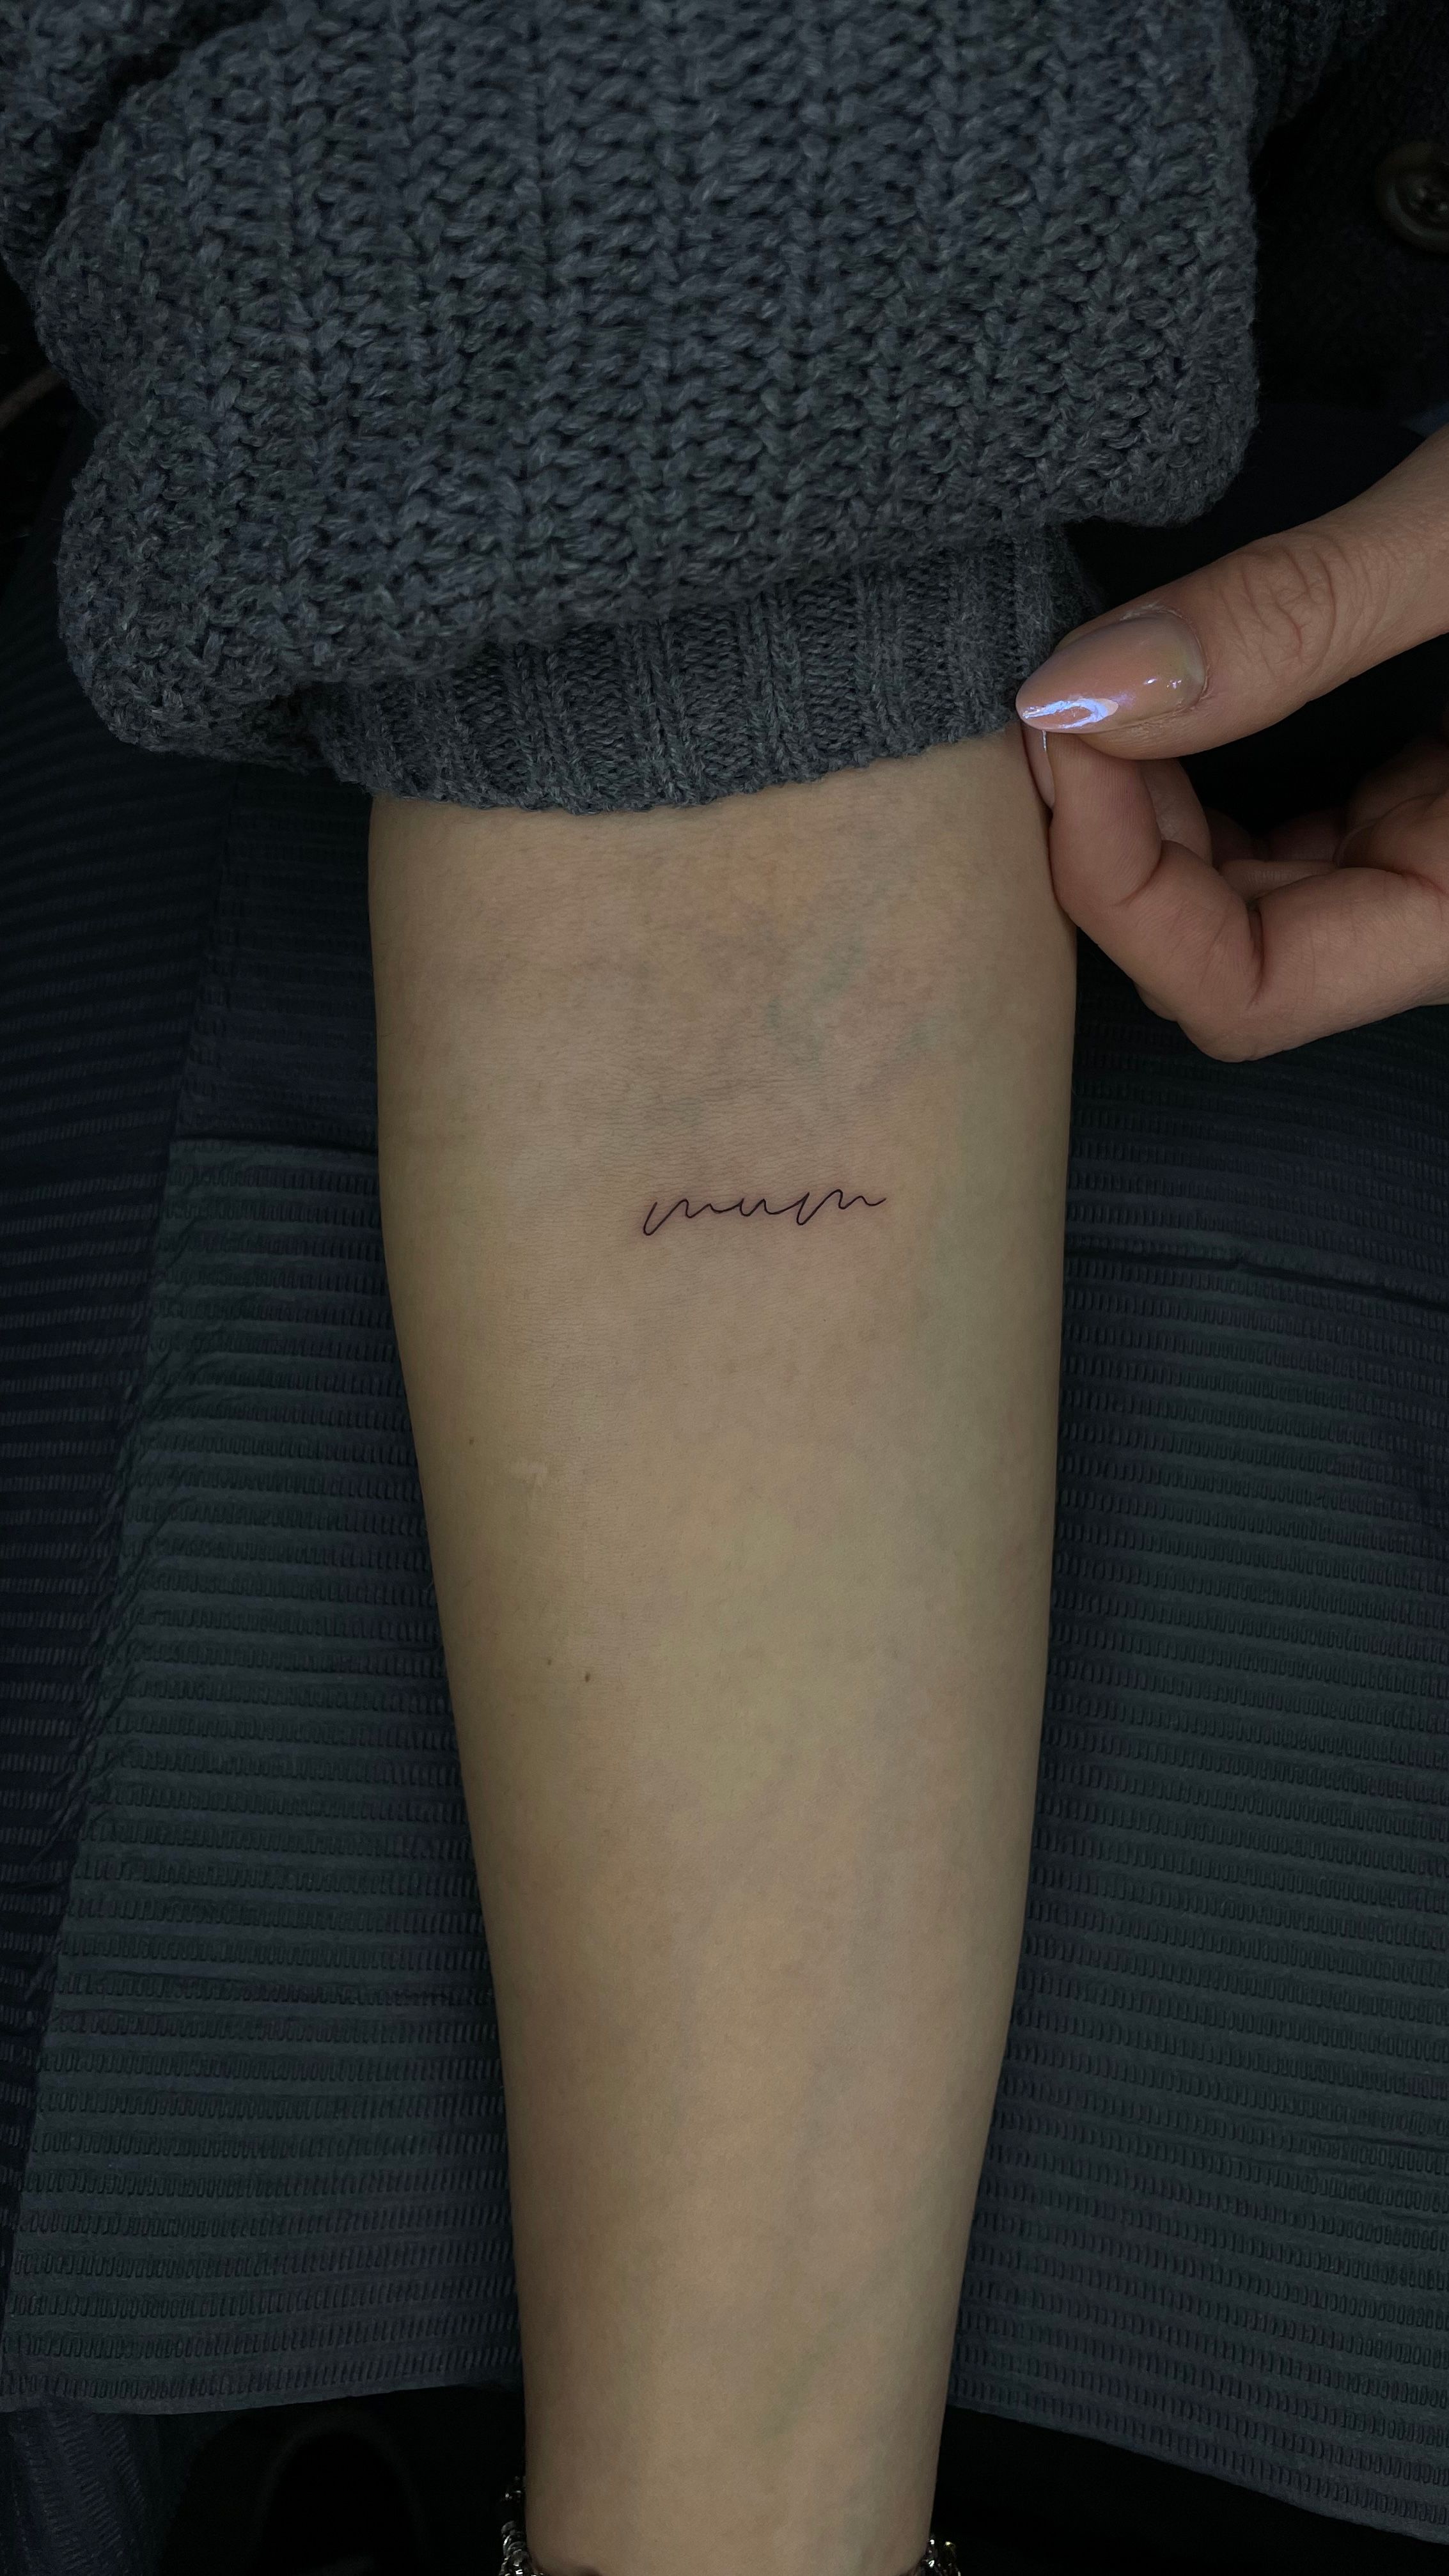 I'd love to see your script tattoos with this placement. : r/TattooDesigns